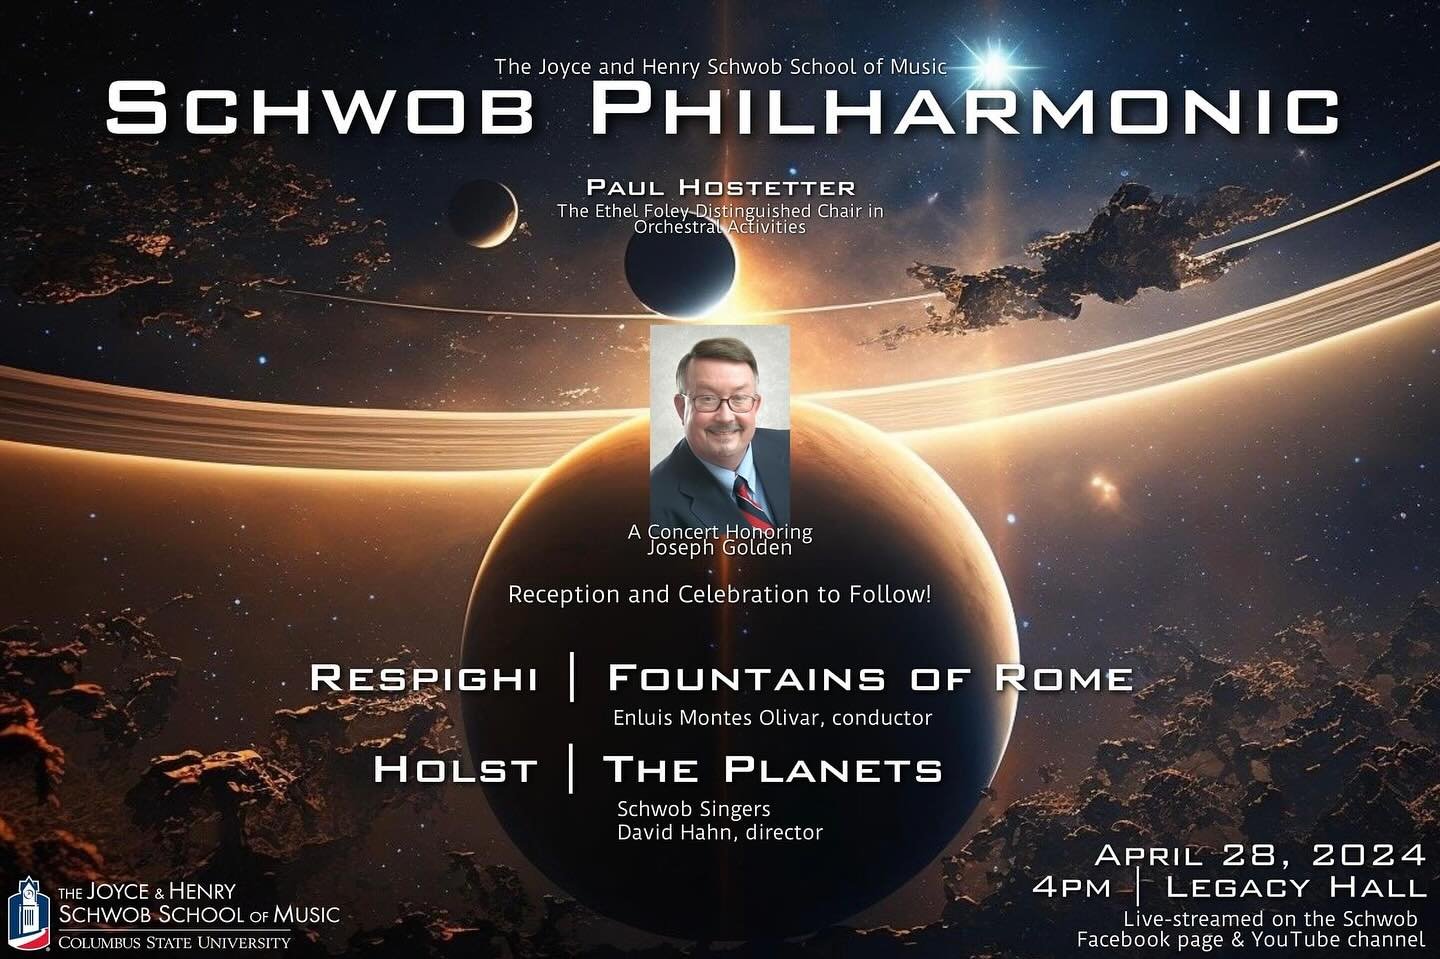 🔔 This Sunday April 28th at 4 pm in Legacy Hall the Schwob Philharmonic will be performing Resphigi&rsquo;s Fountains of Rome and Holst&rsquo;s The Planets, alongside the Schwob Singers under the direction of Dr. David Hahn. 

Join this event at Leg